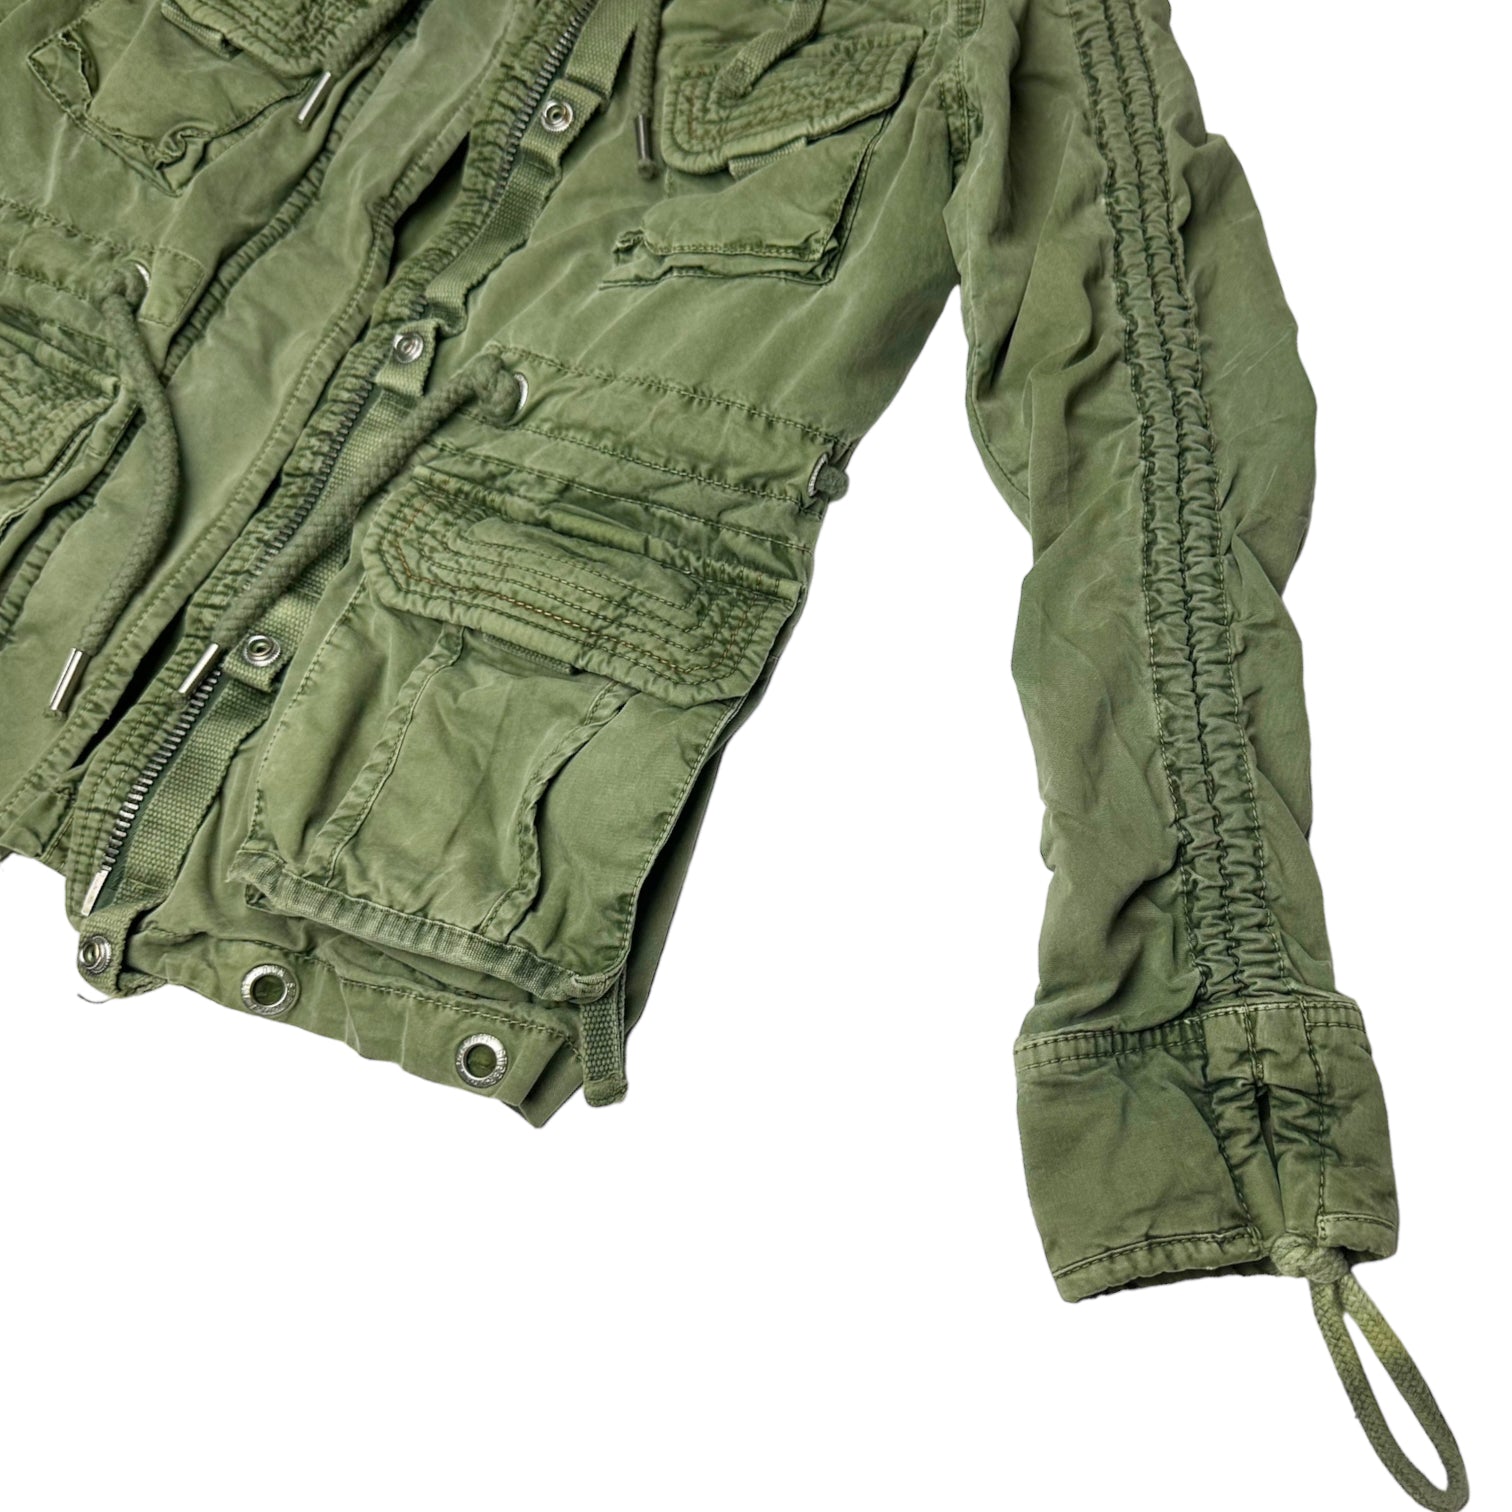 SuperDry Military Jacket (XS)